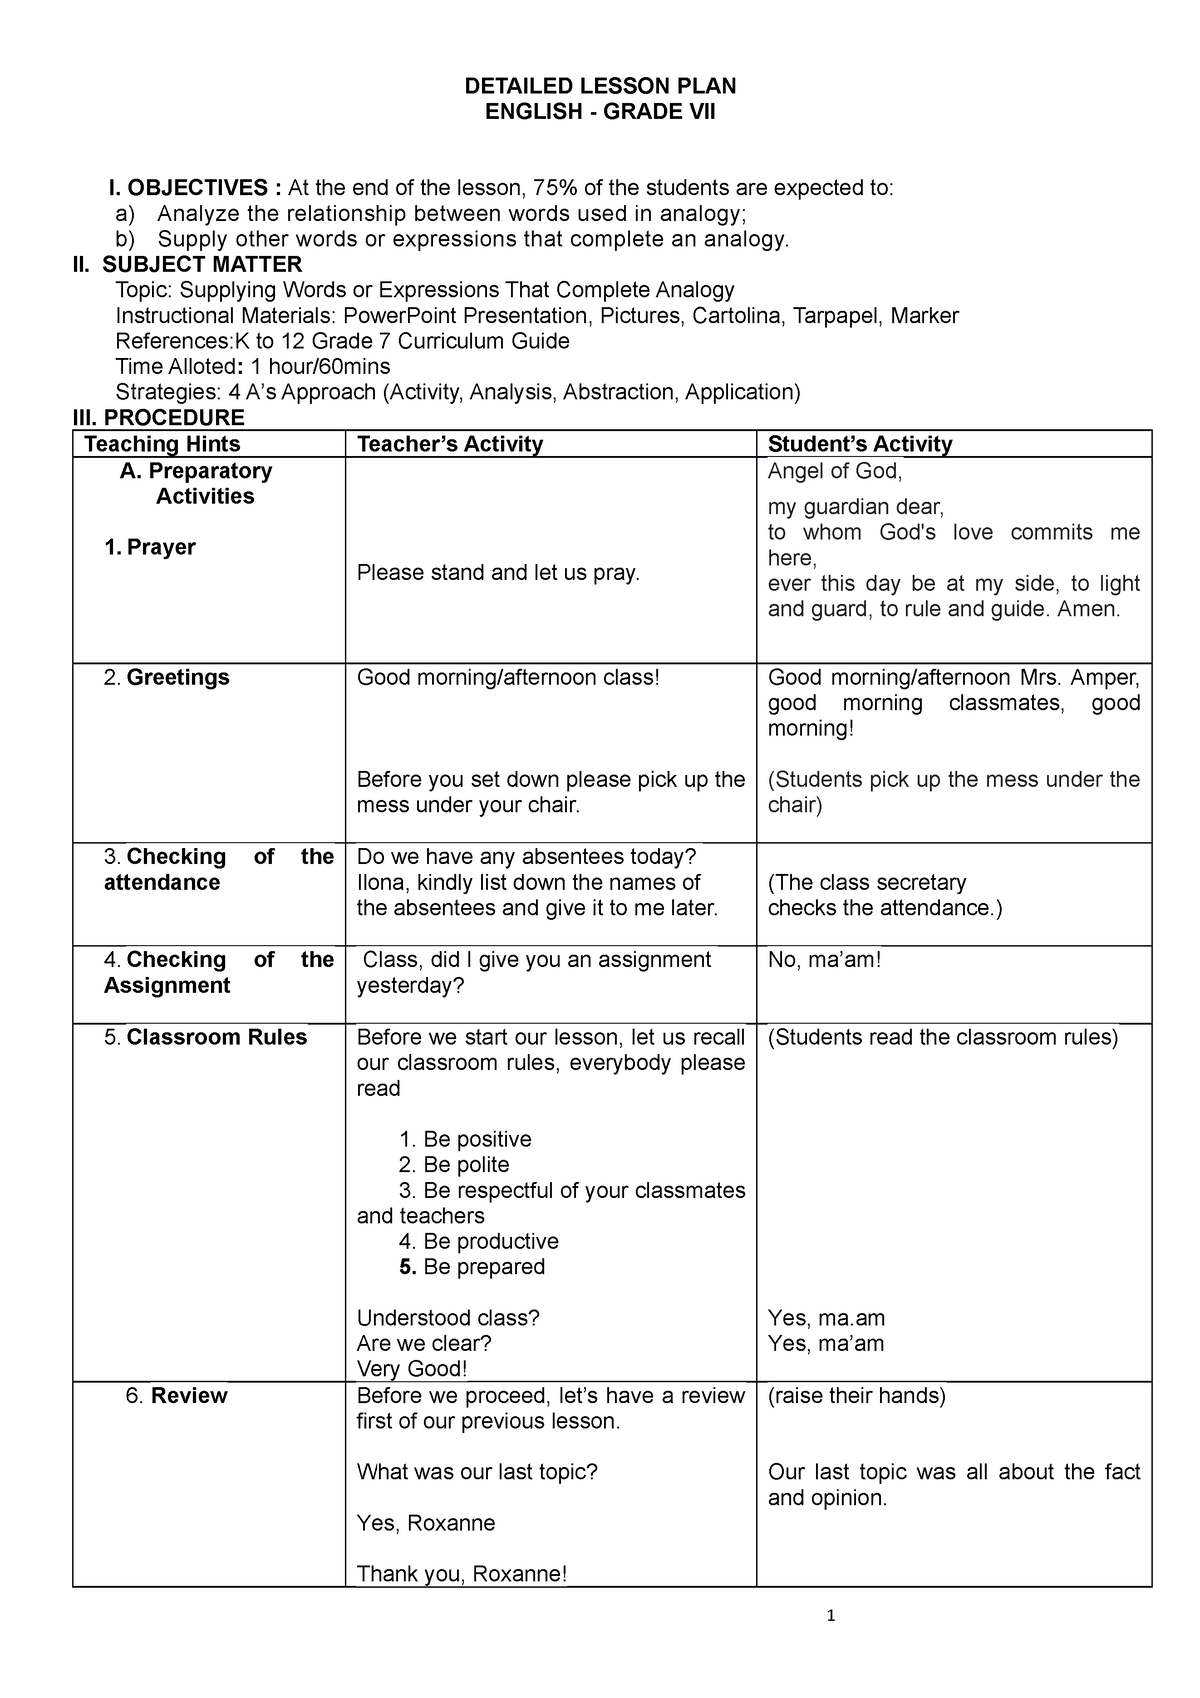 Supplying Words Or Expressions That Complete Analogy Detailed Lesson Plan English Grade Vii 6389